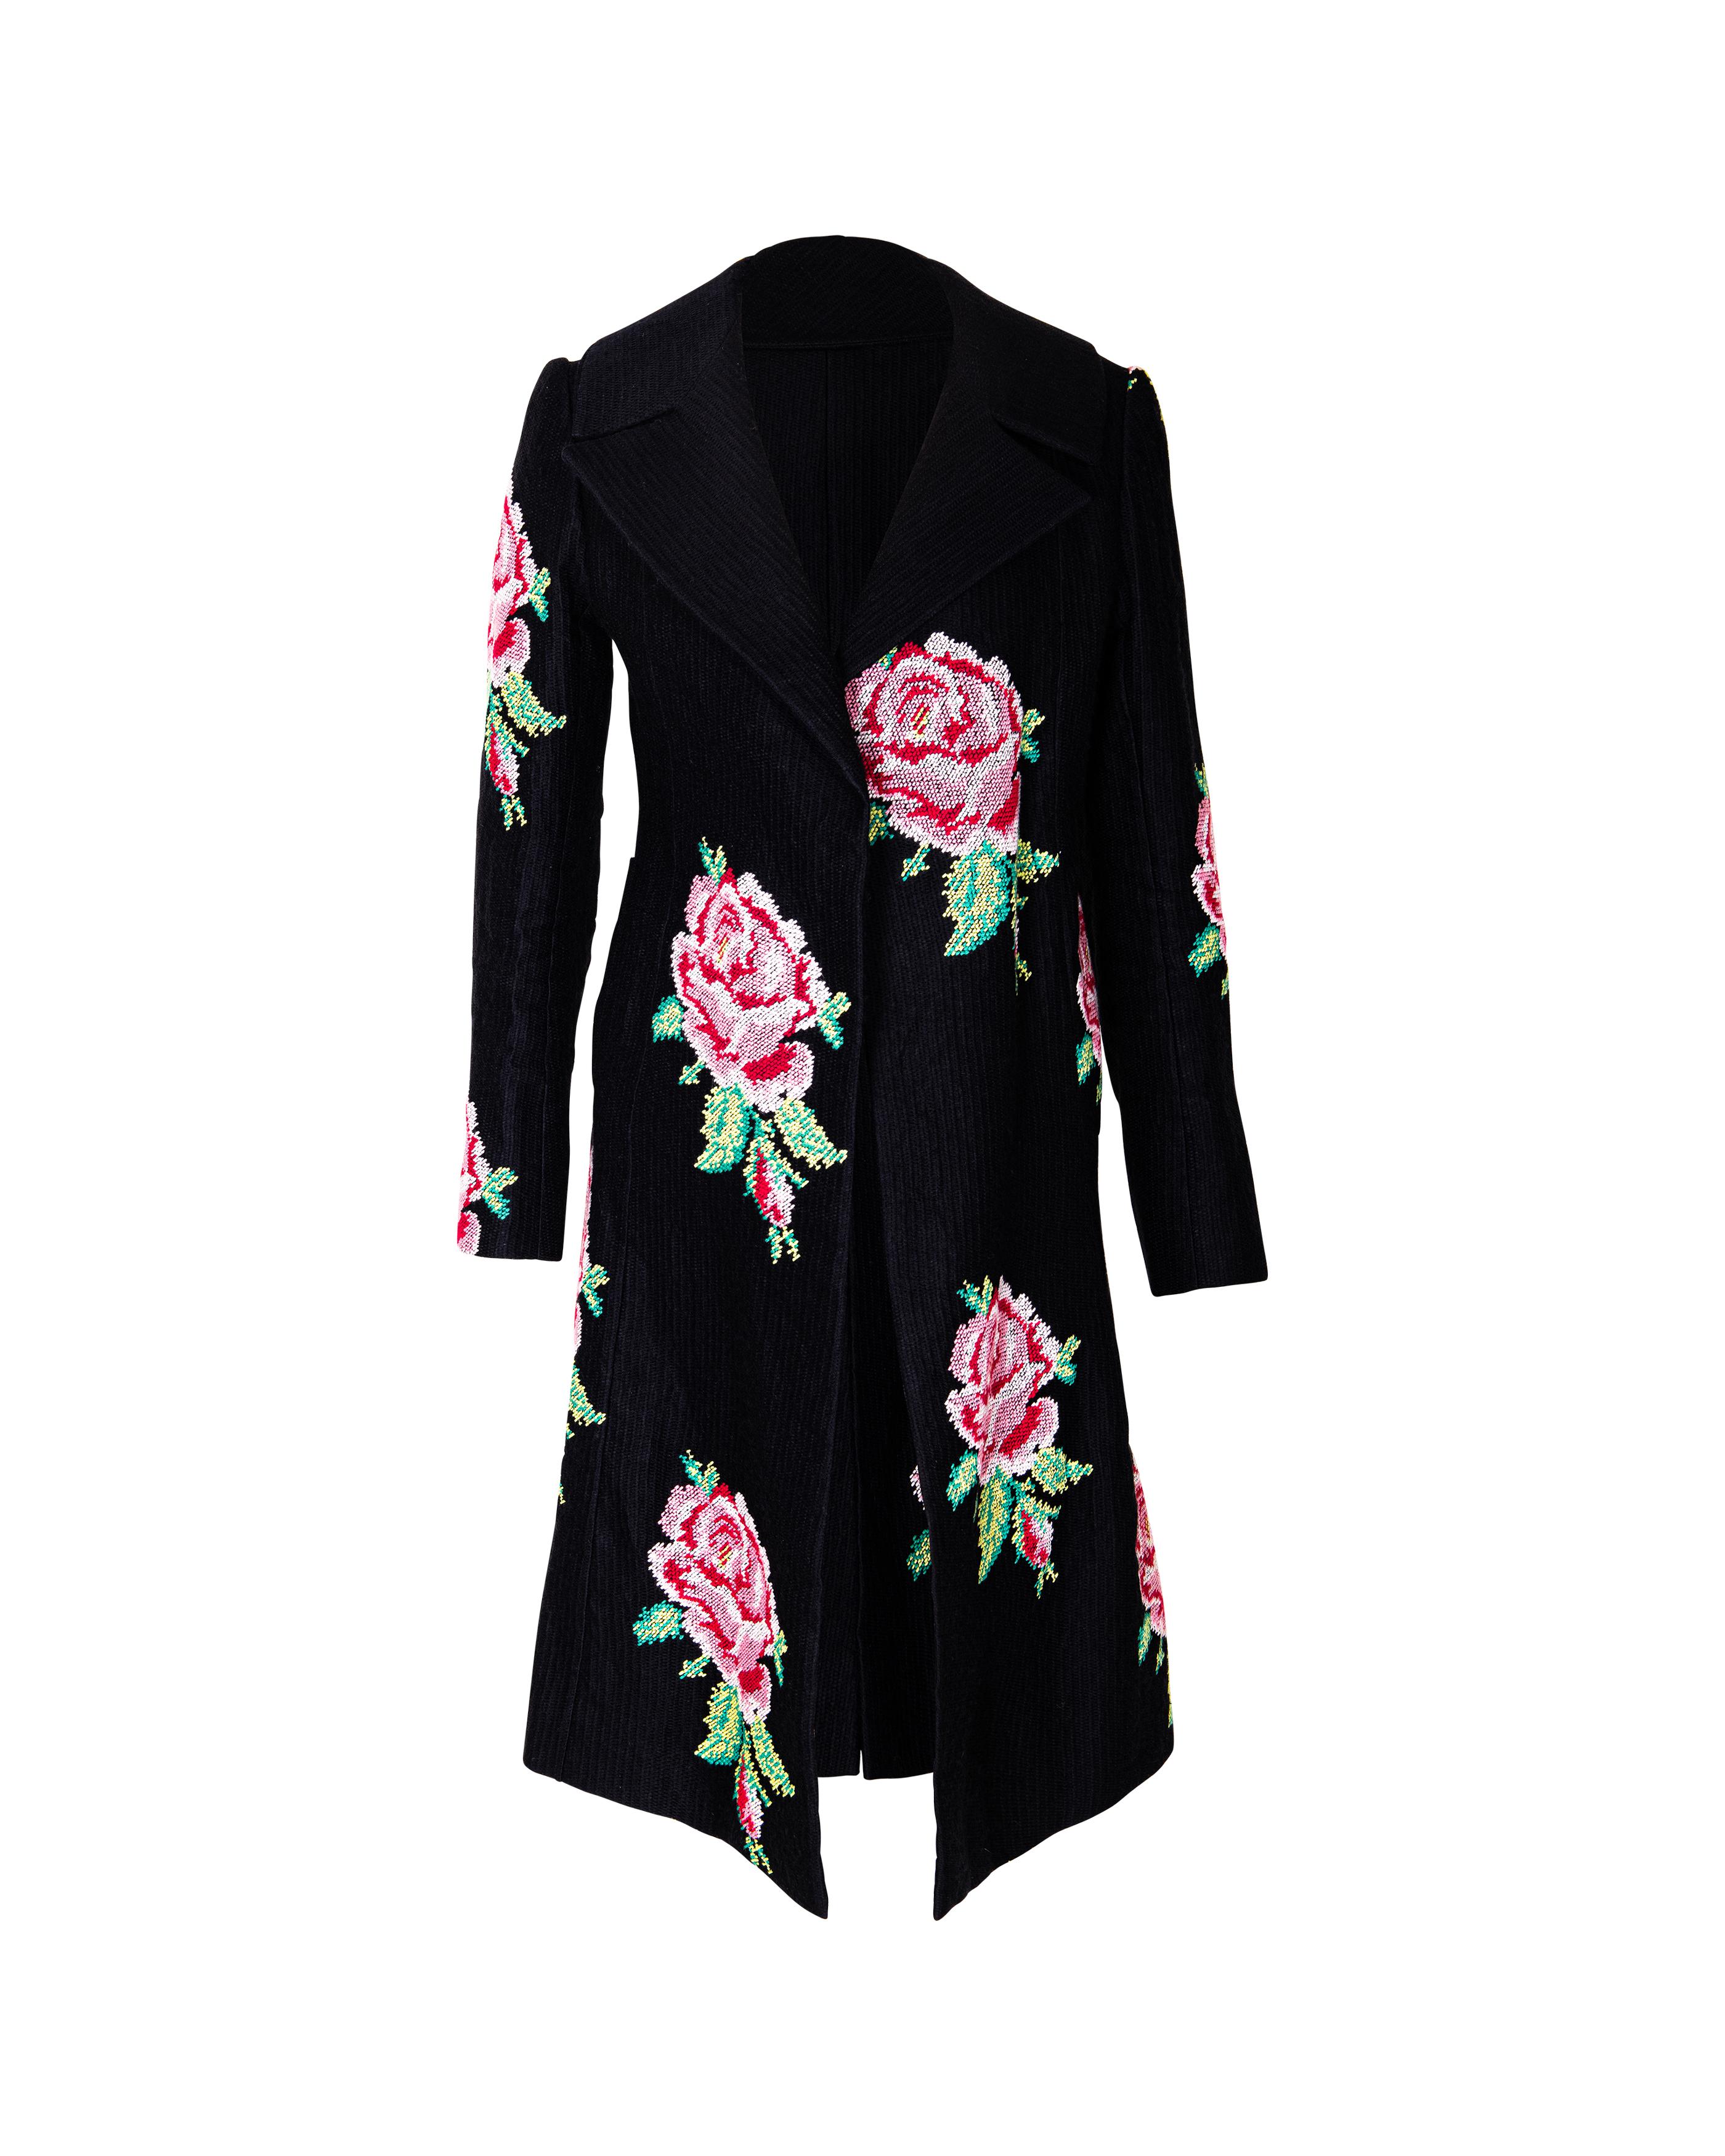 A/W 1996 Givenchy Haute Couture by John Galliano Embroidered Rose Print Coat 4